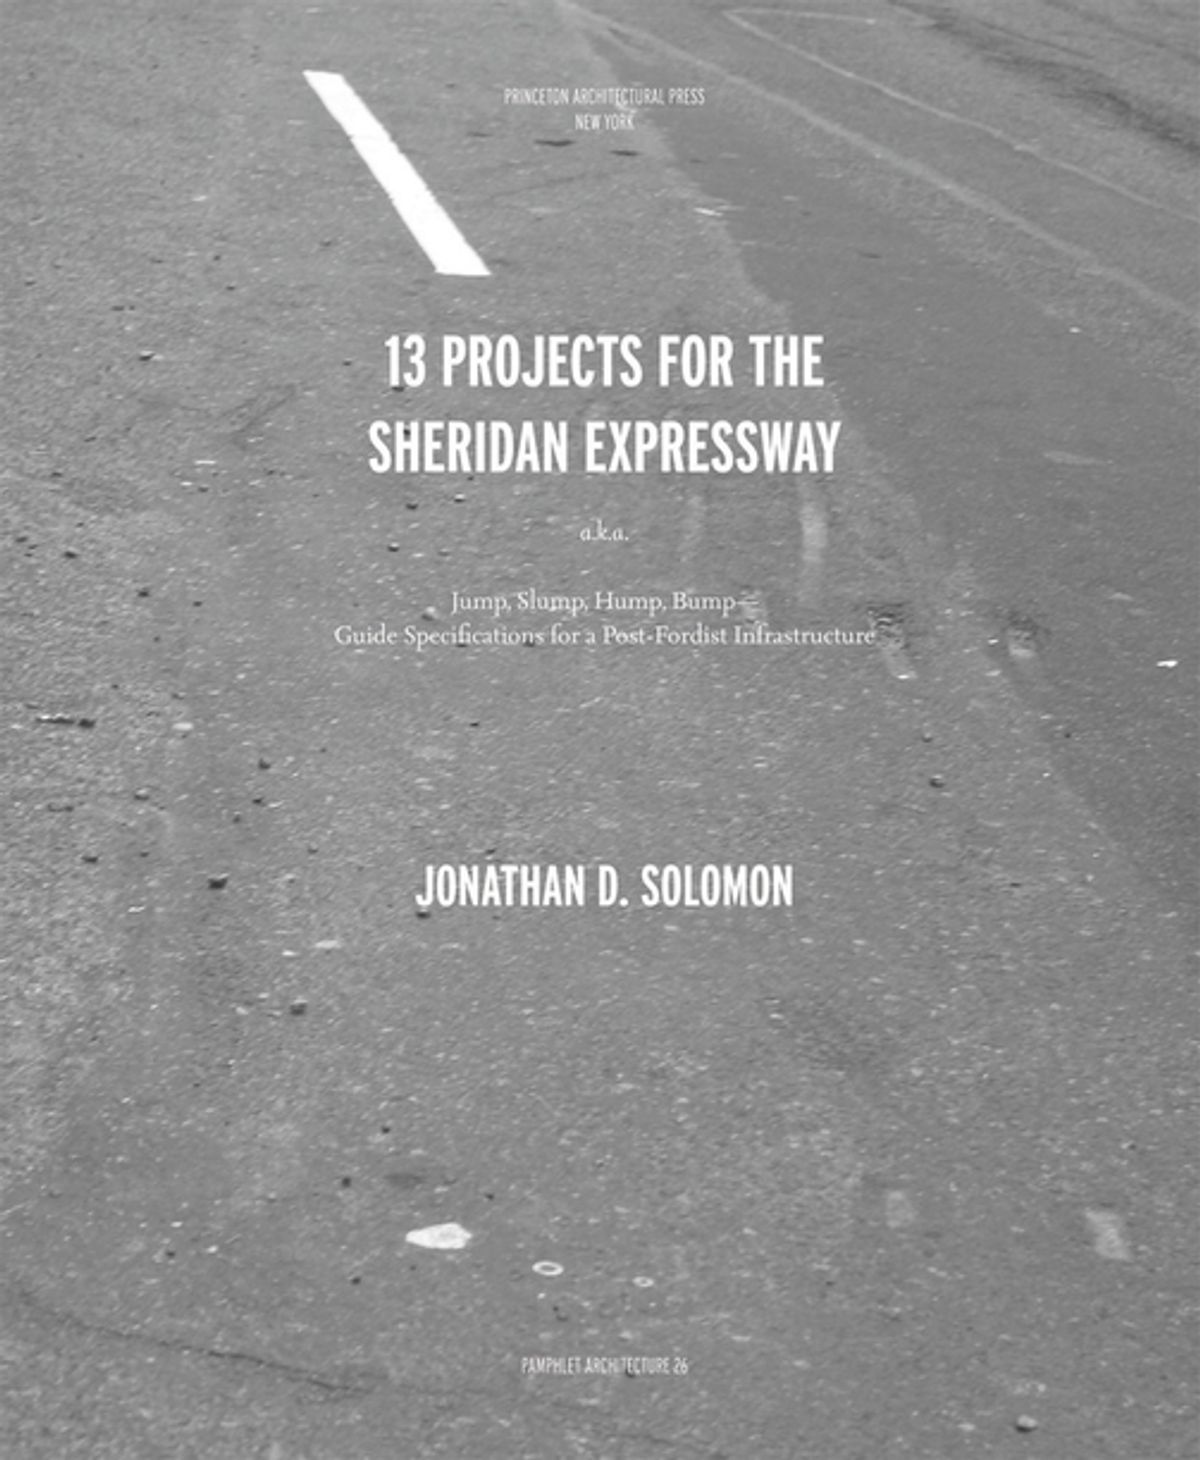 26: 13 Projects for the Sheridan Expressway